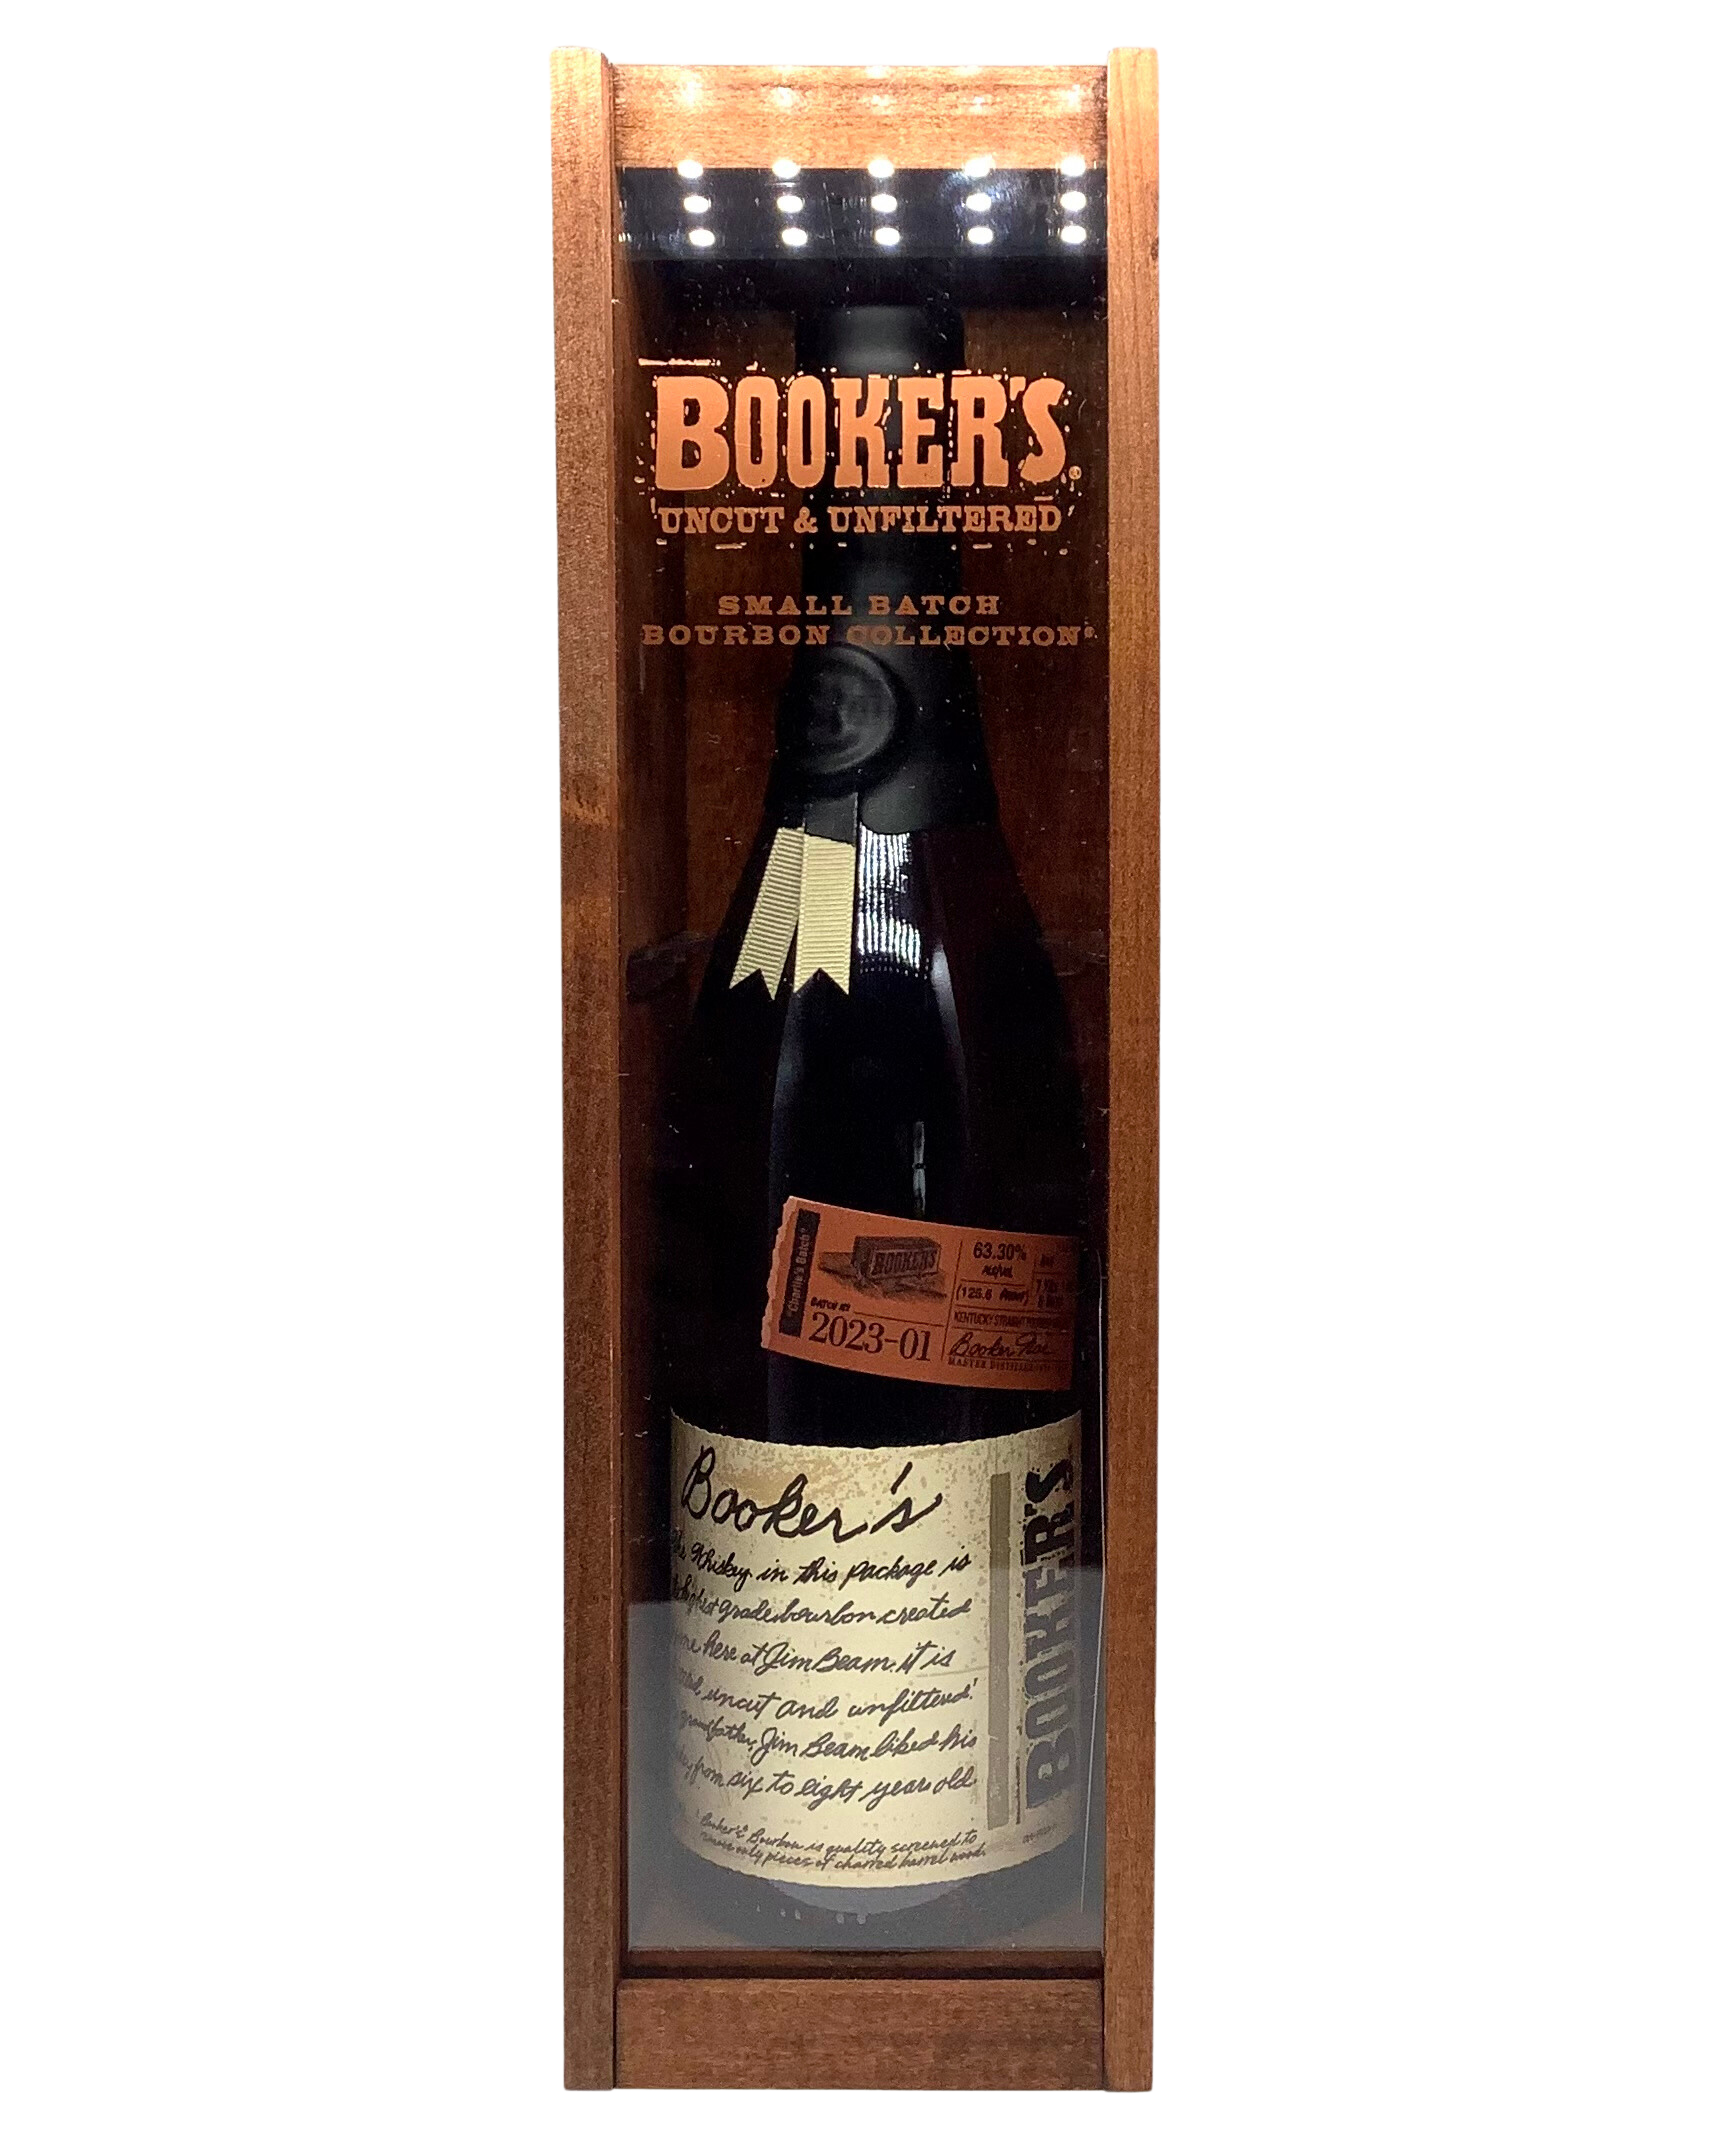 Booker's Small Batch 2023 Collection: 2023-01 